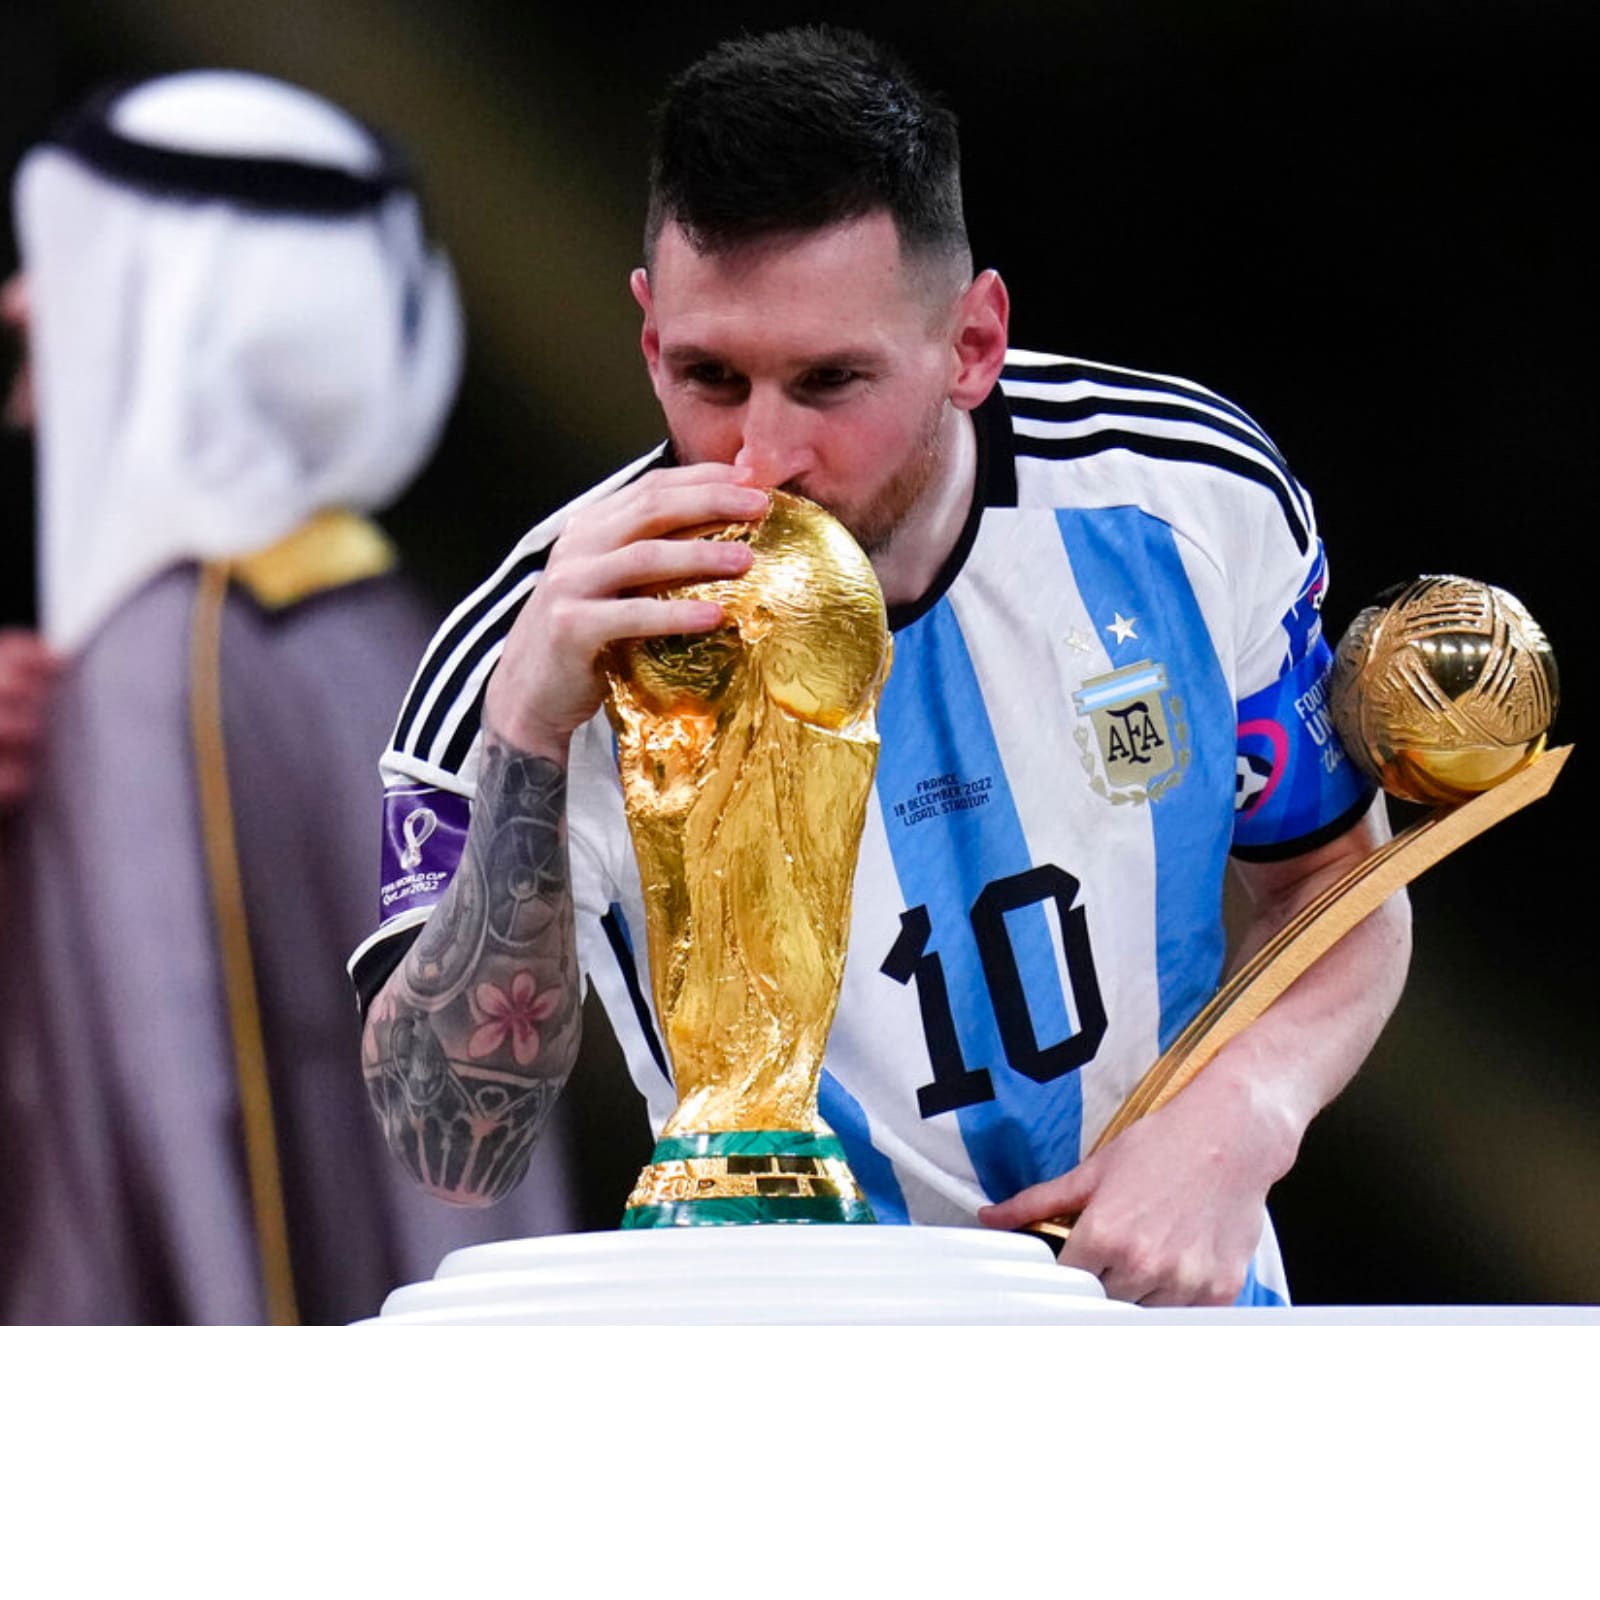 Argentina vs France FIFA World Cup 2022 Final Highlights Lionel Messi, Argentina Win on Penalties